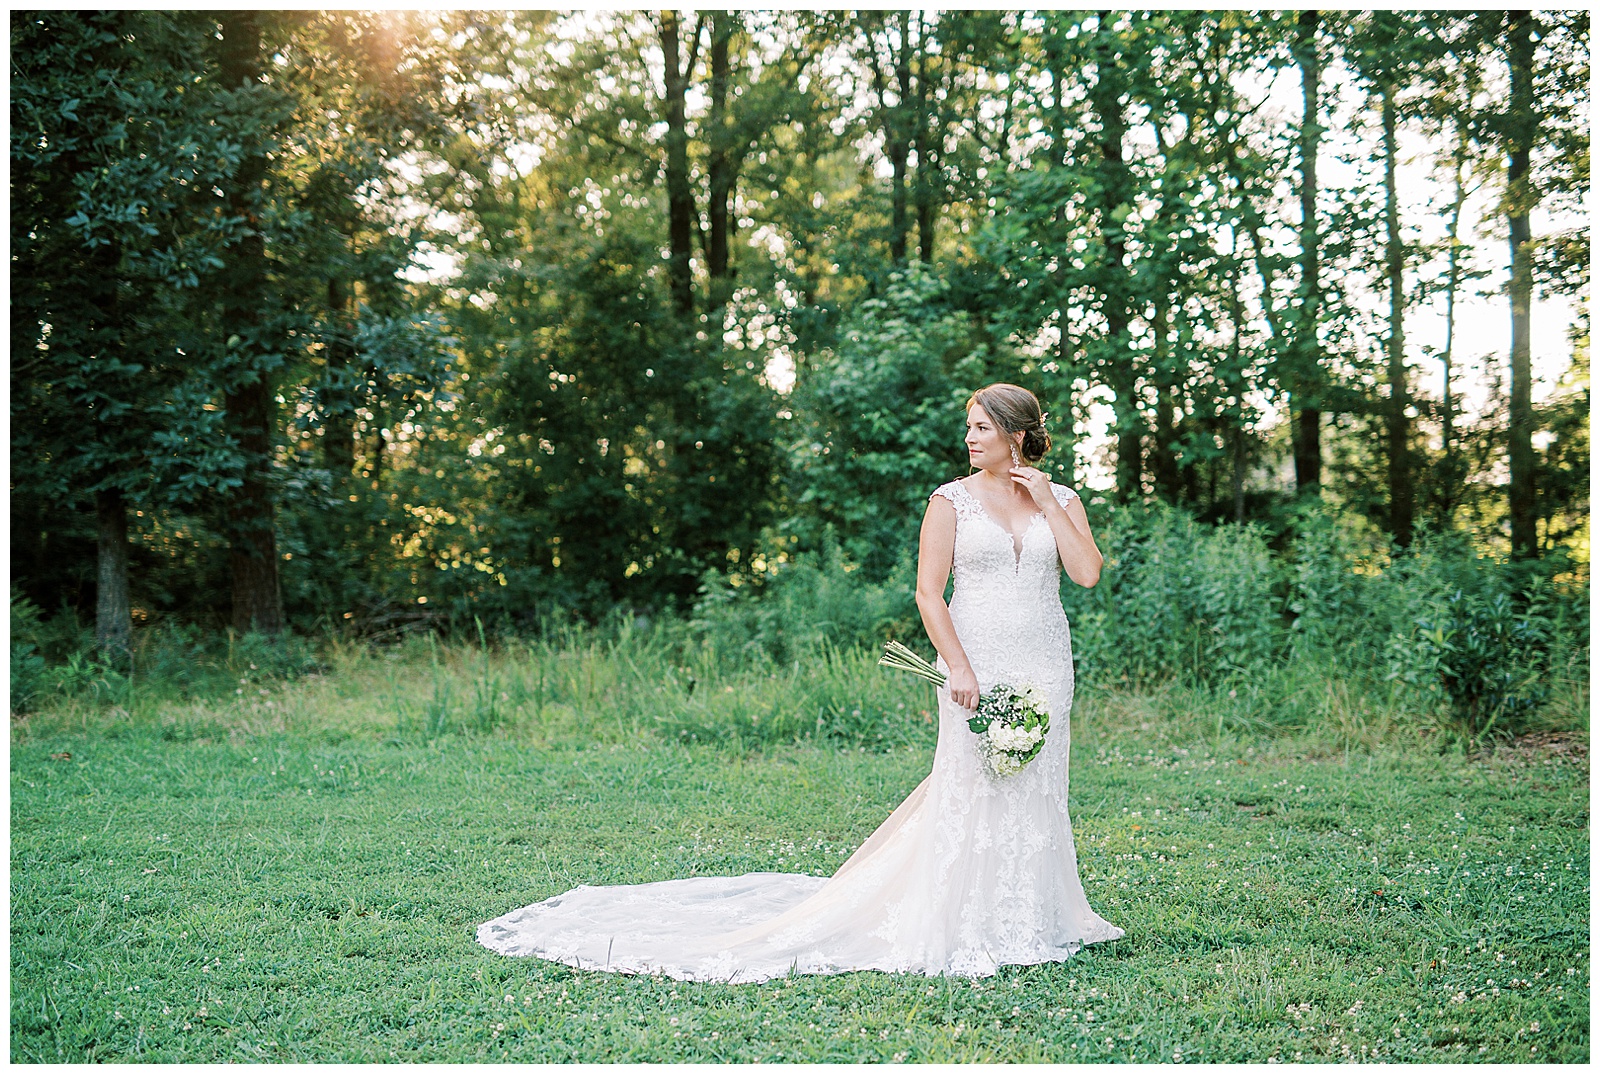 Bridal Portraits of Lace Wedding Dress at sunset in wood and fields